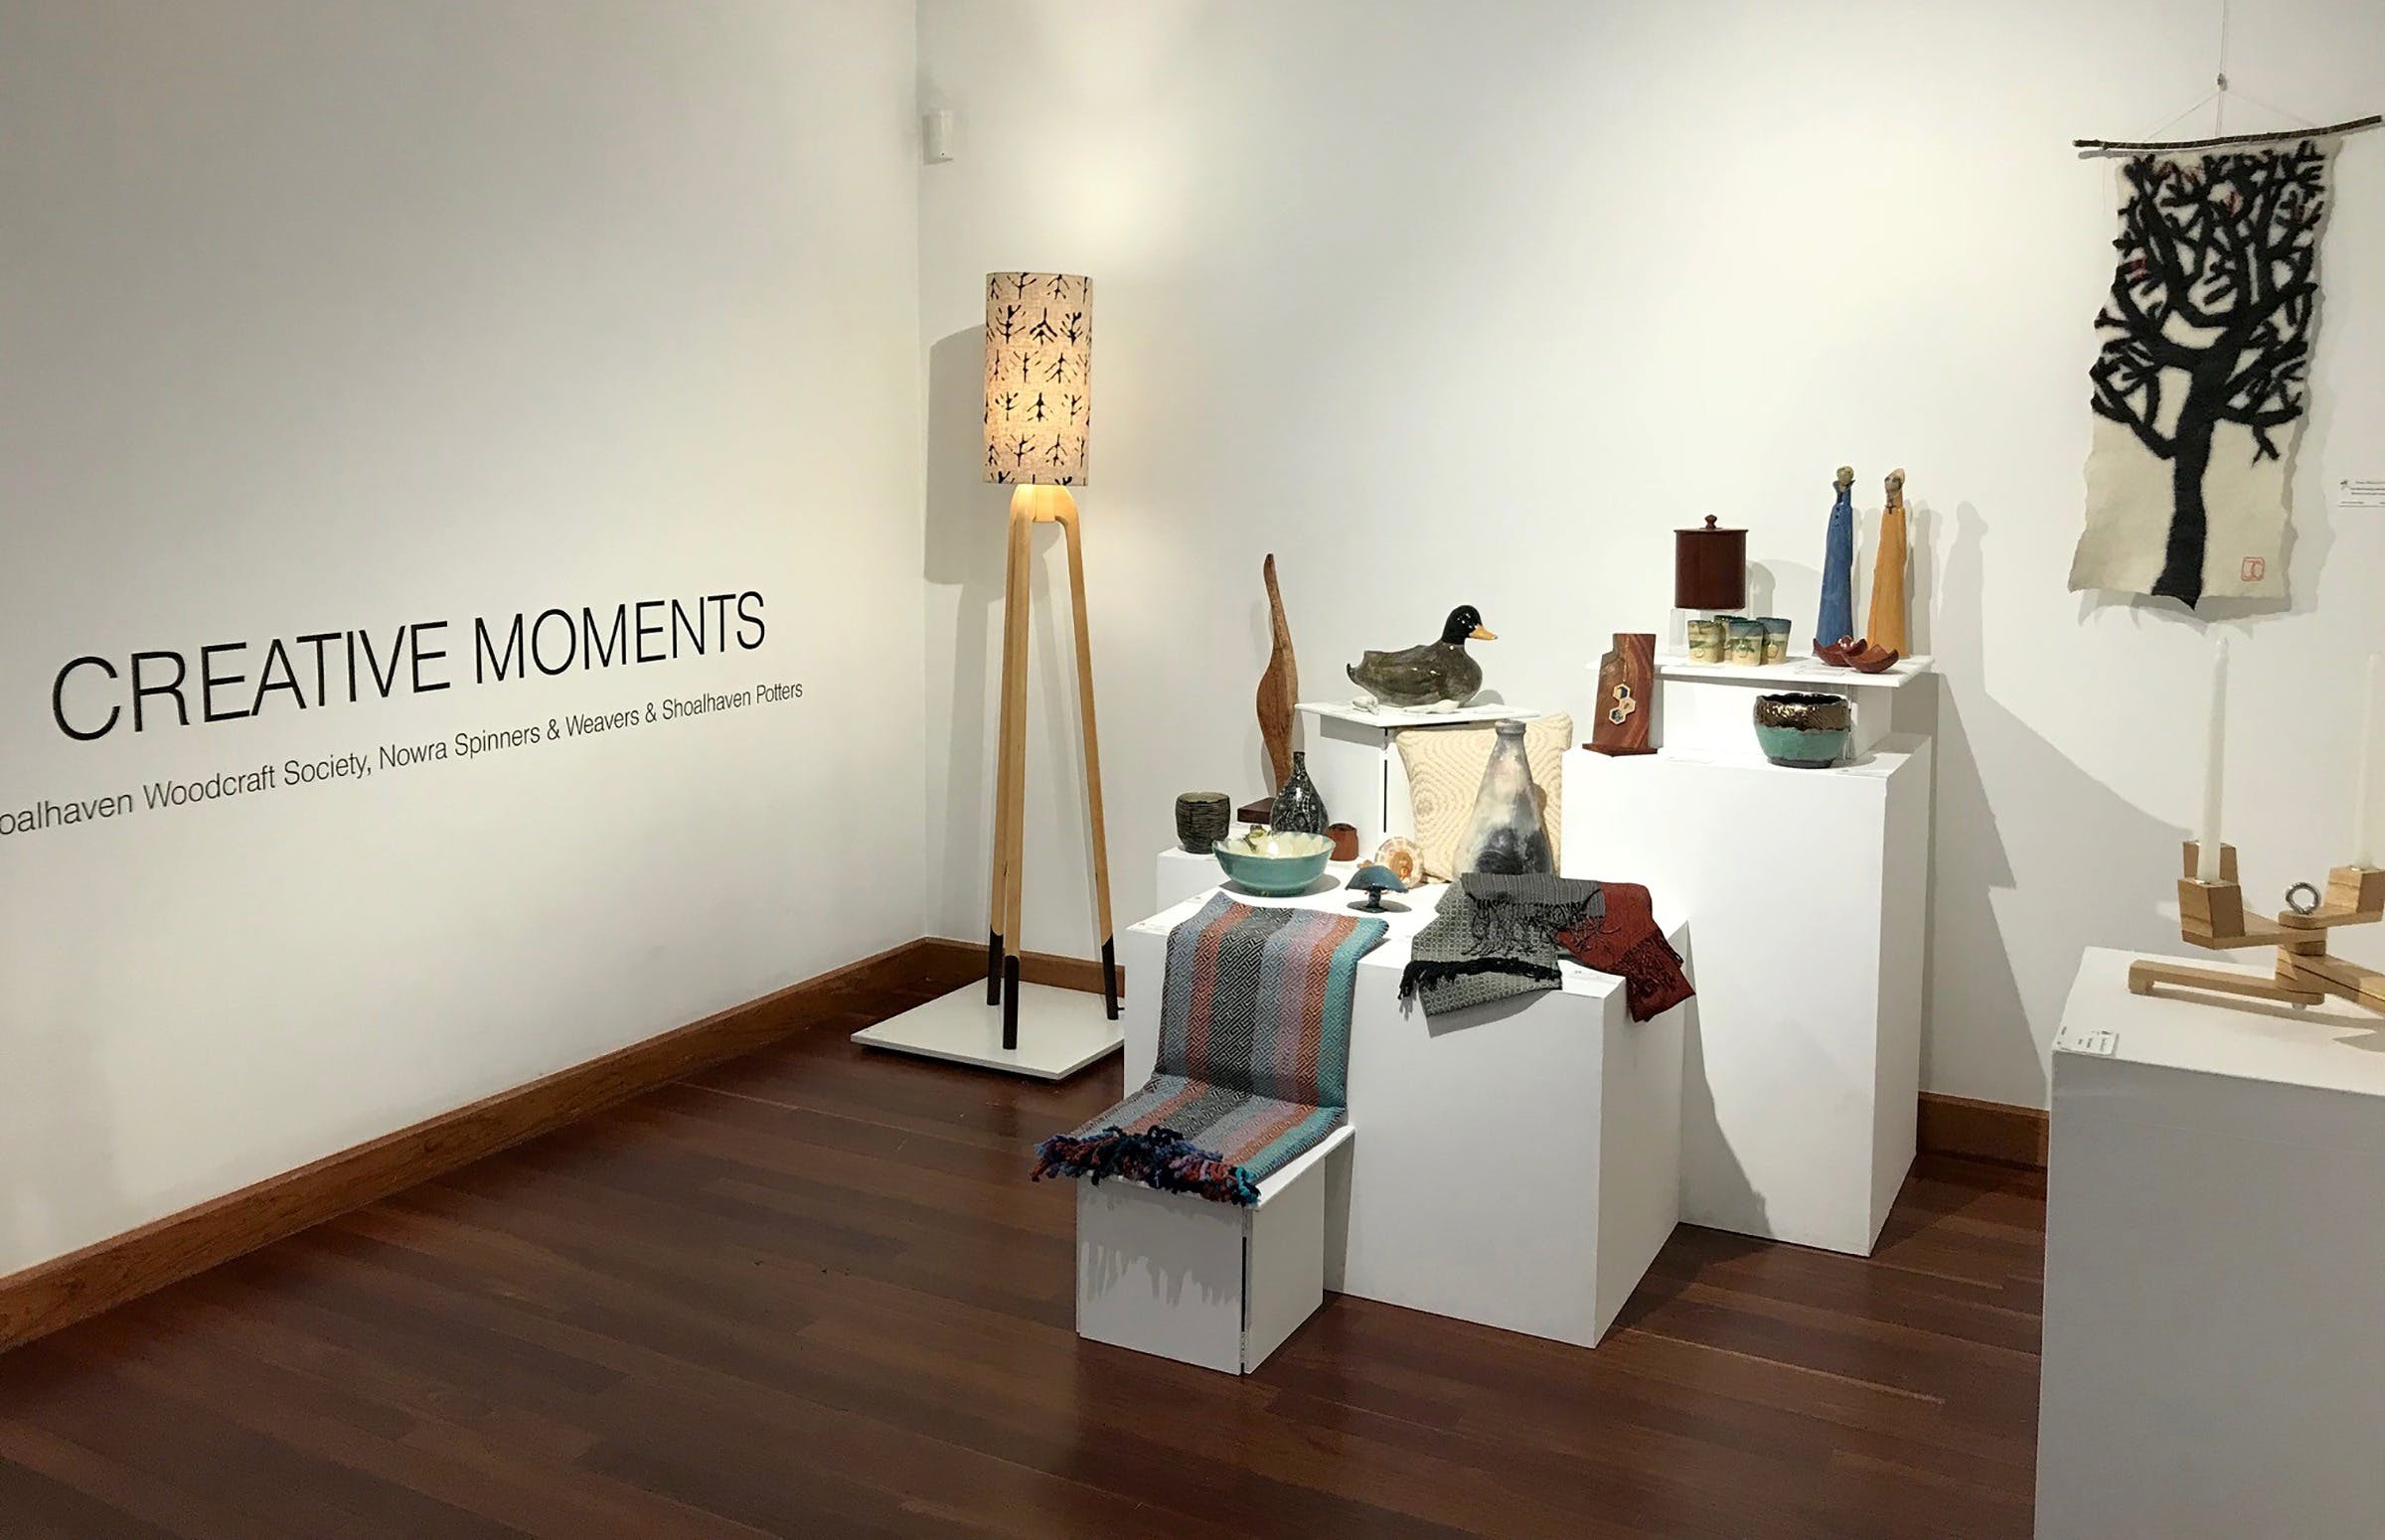 Creative Moments Exhibiton - Pubs and Clubs